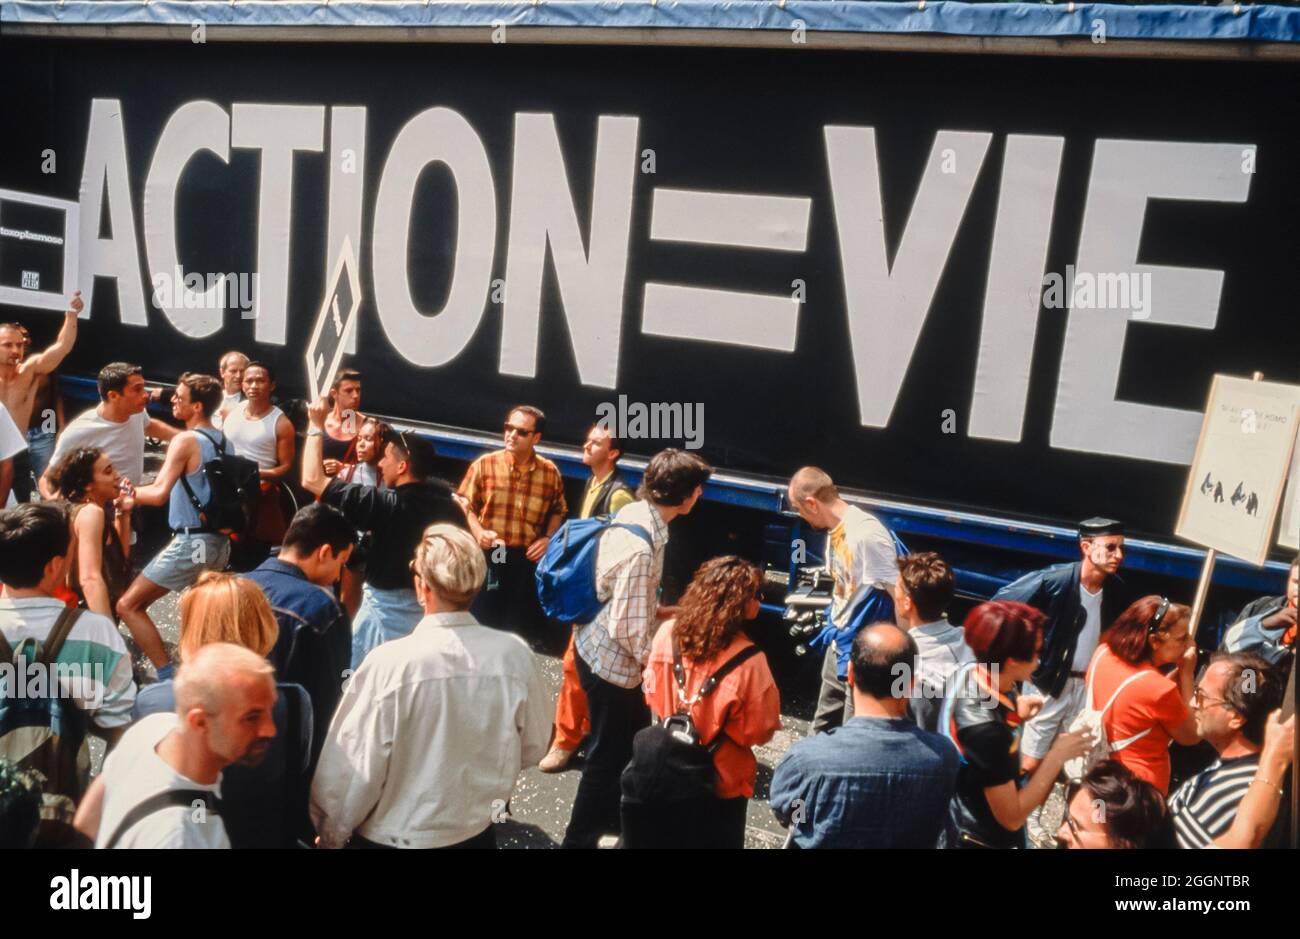 Crowd of People, Crowd AIDS Activists of Act Up PAris Demonstrating on Street, 'Gay Pride' 1996, Queer activism, pride march, Protest Banner 'Action = Life' Slogan Stock Photo